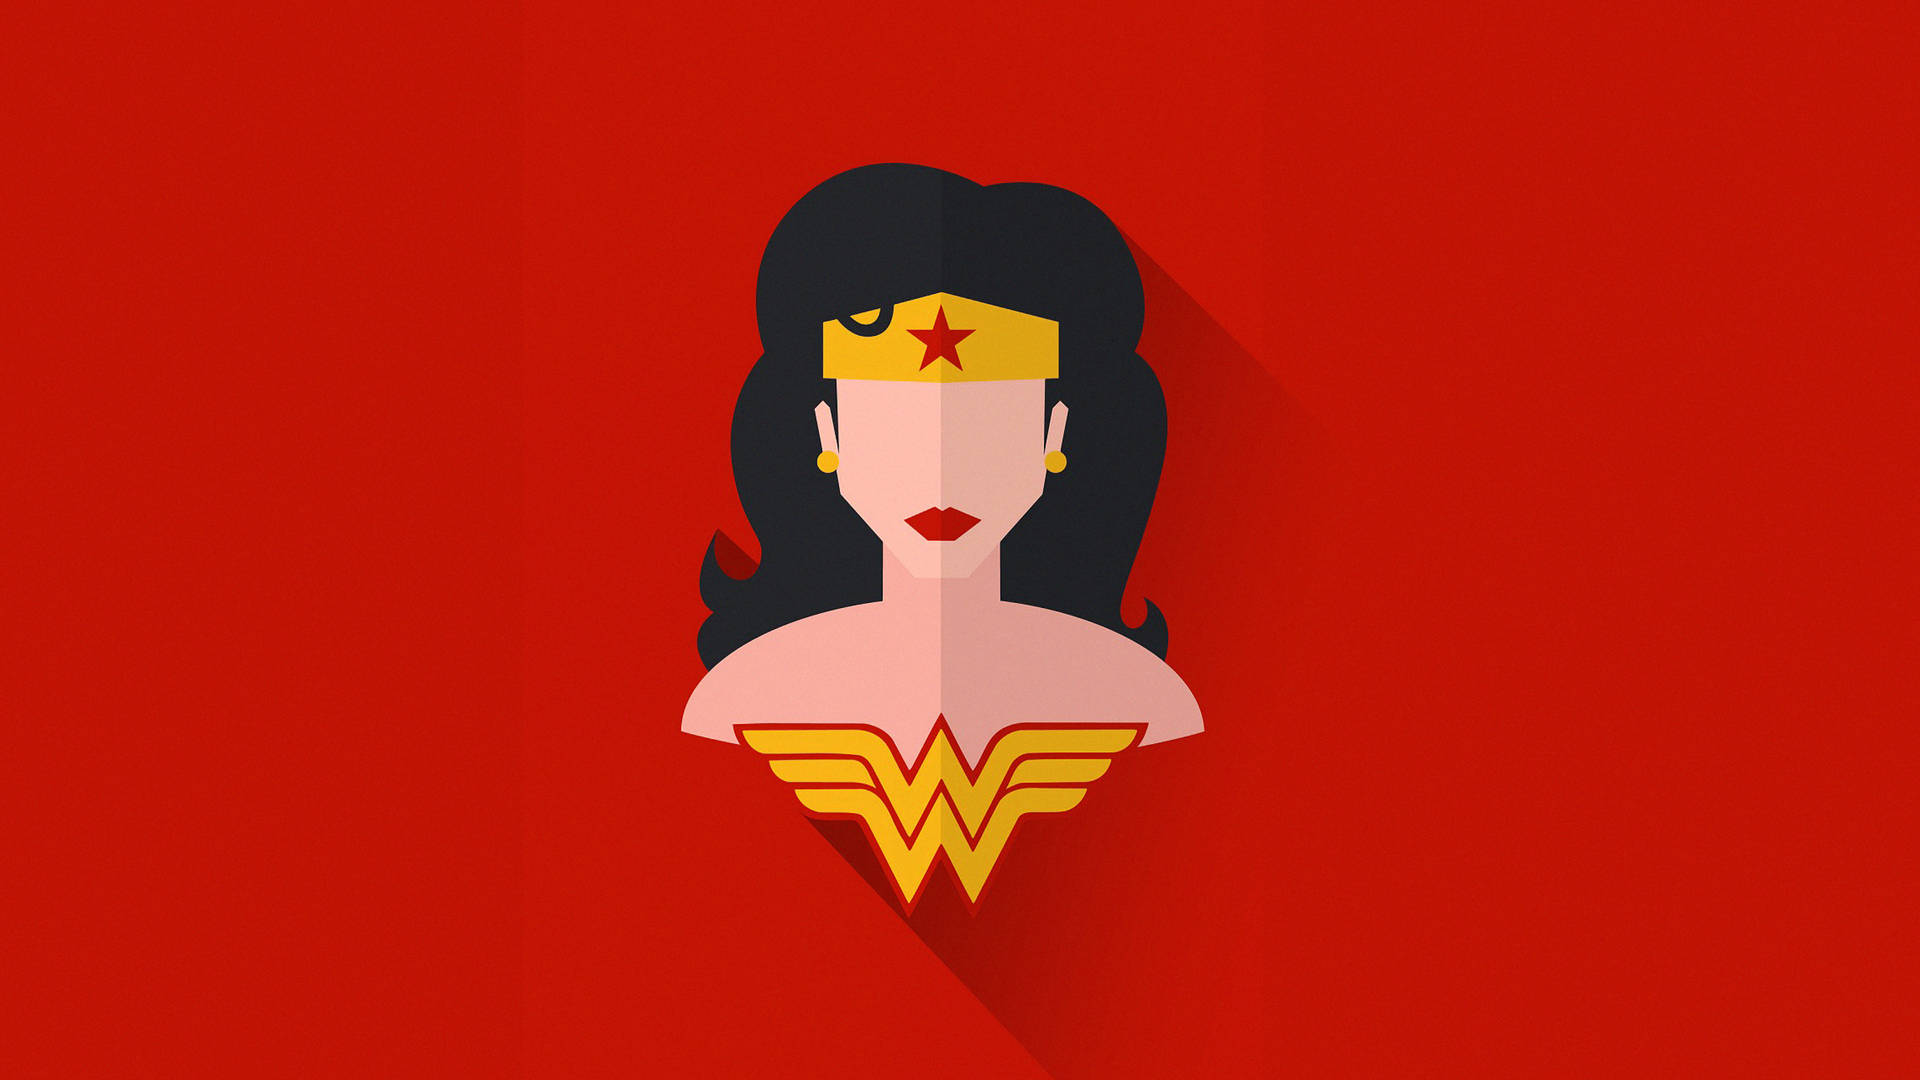 "Powerful, Strong and Beautiful: The Invincible Wonder Woman" Wallpaper